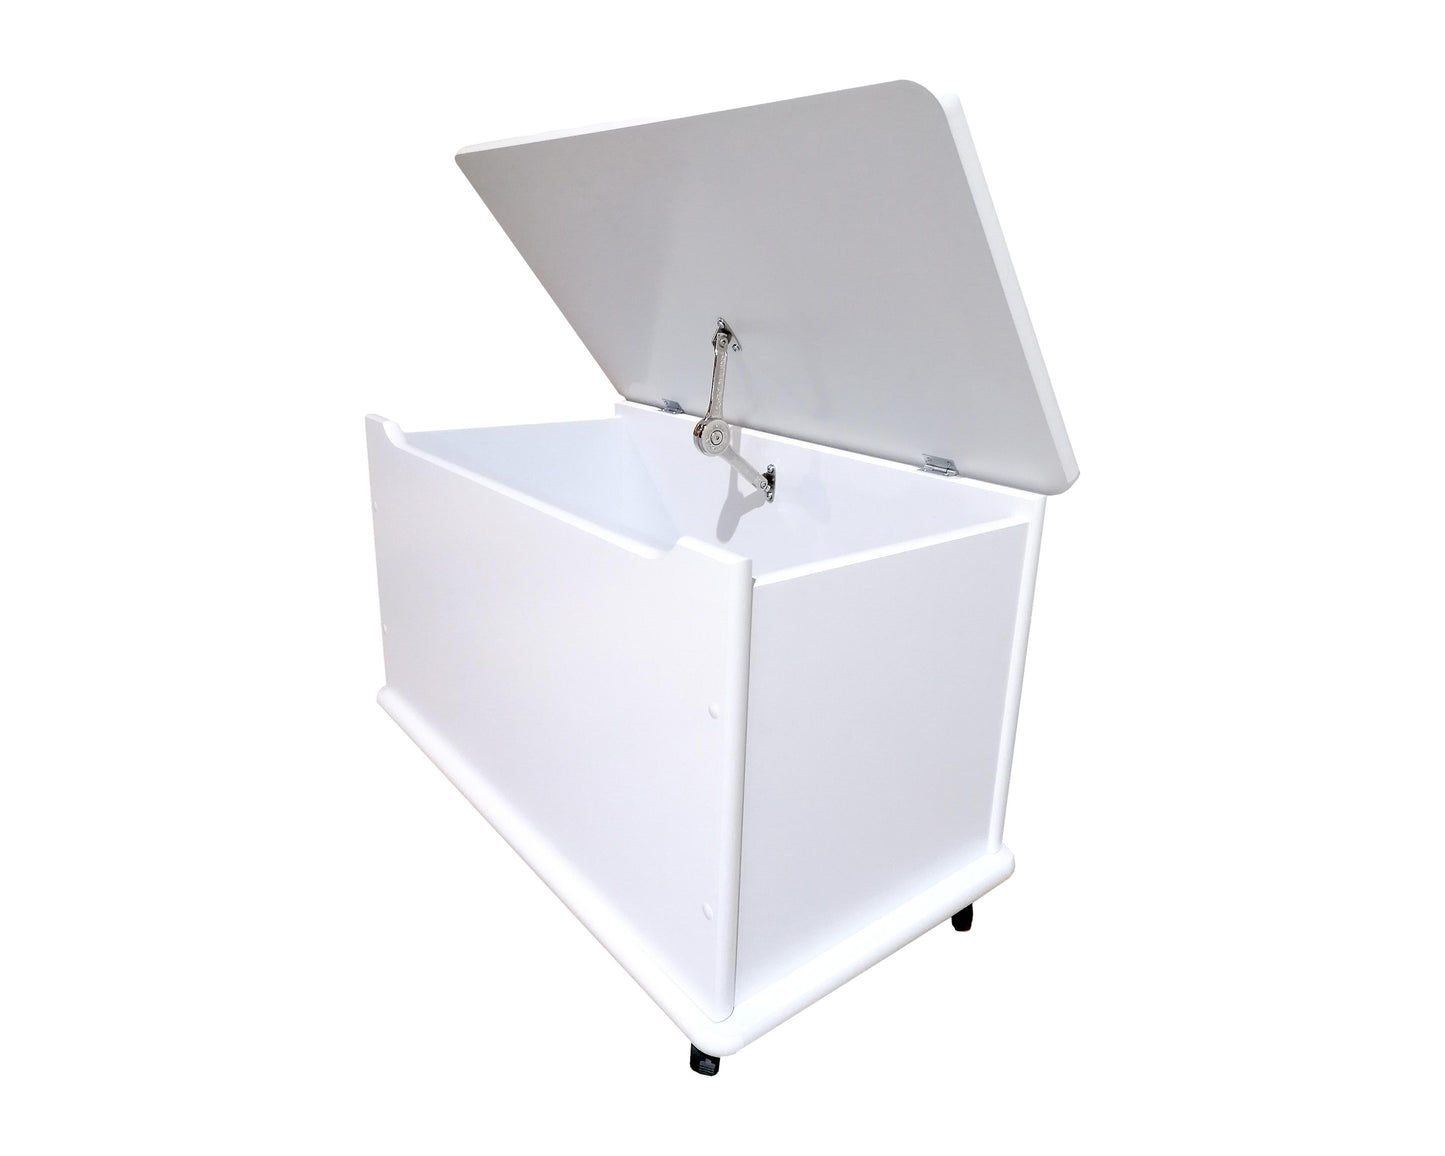 Playchest with wheels - White